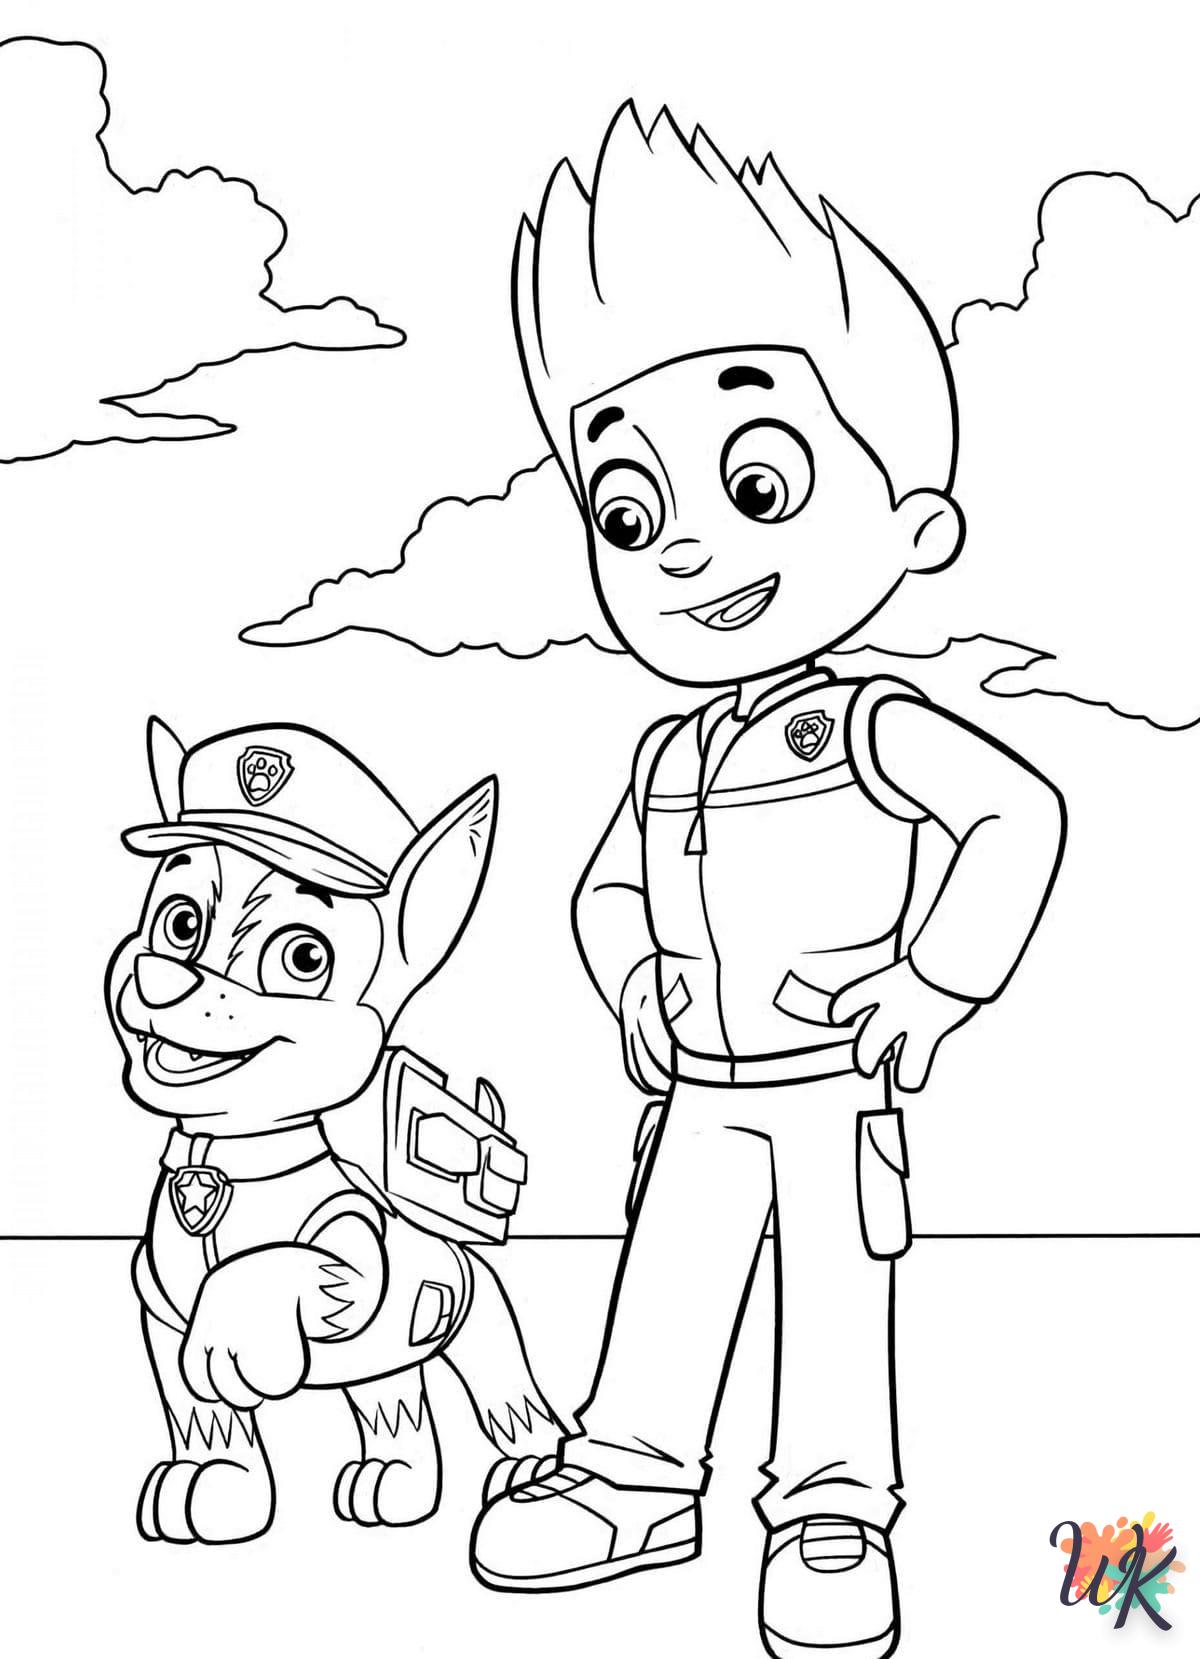 easy Paw Patrol coloring pages